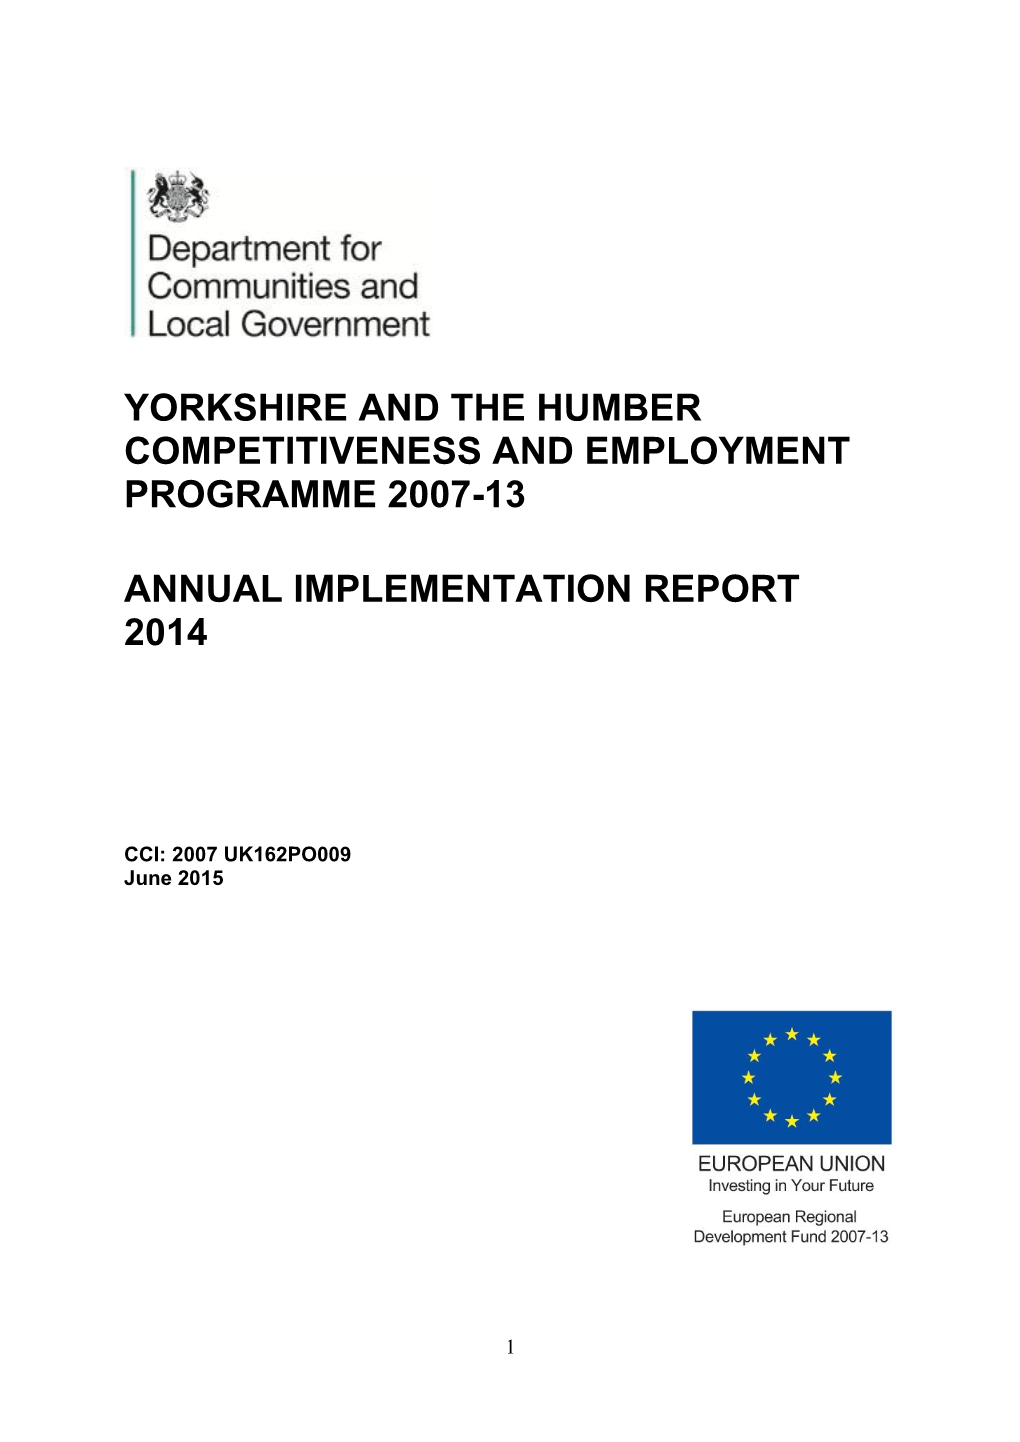 Yorkshire and the Humber Competitiveness and Employment Programme 2007-13